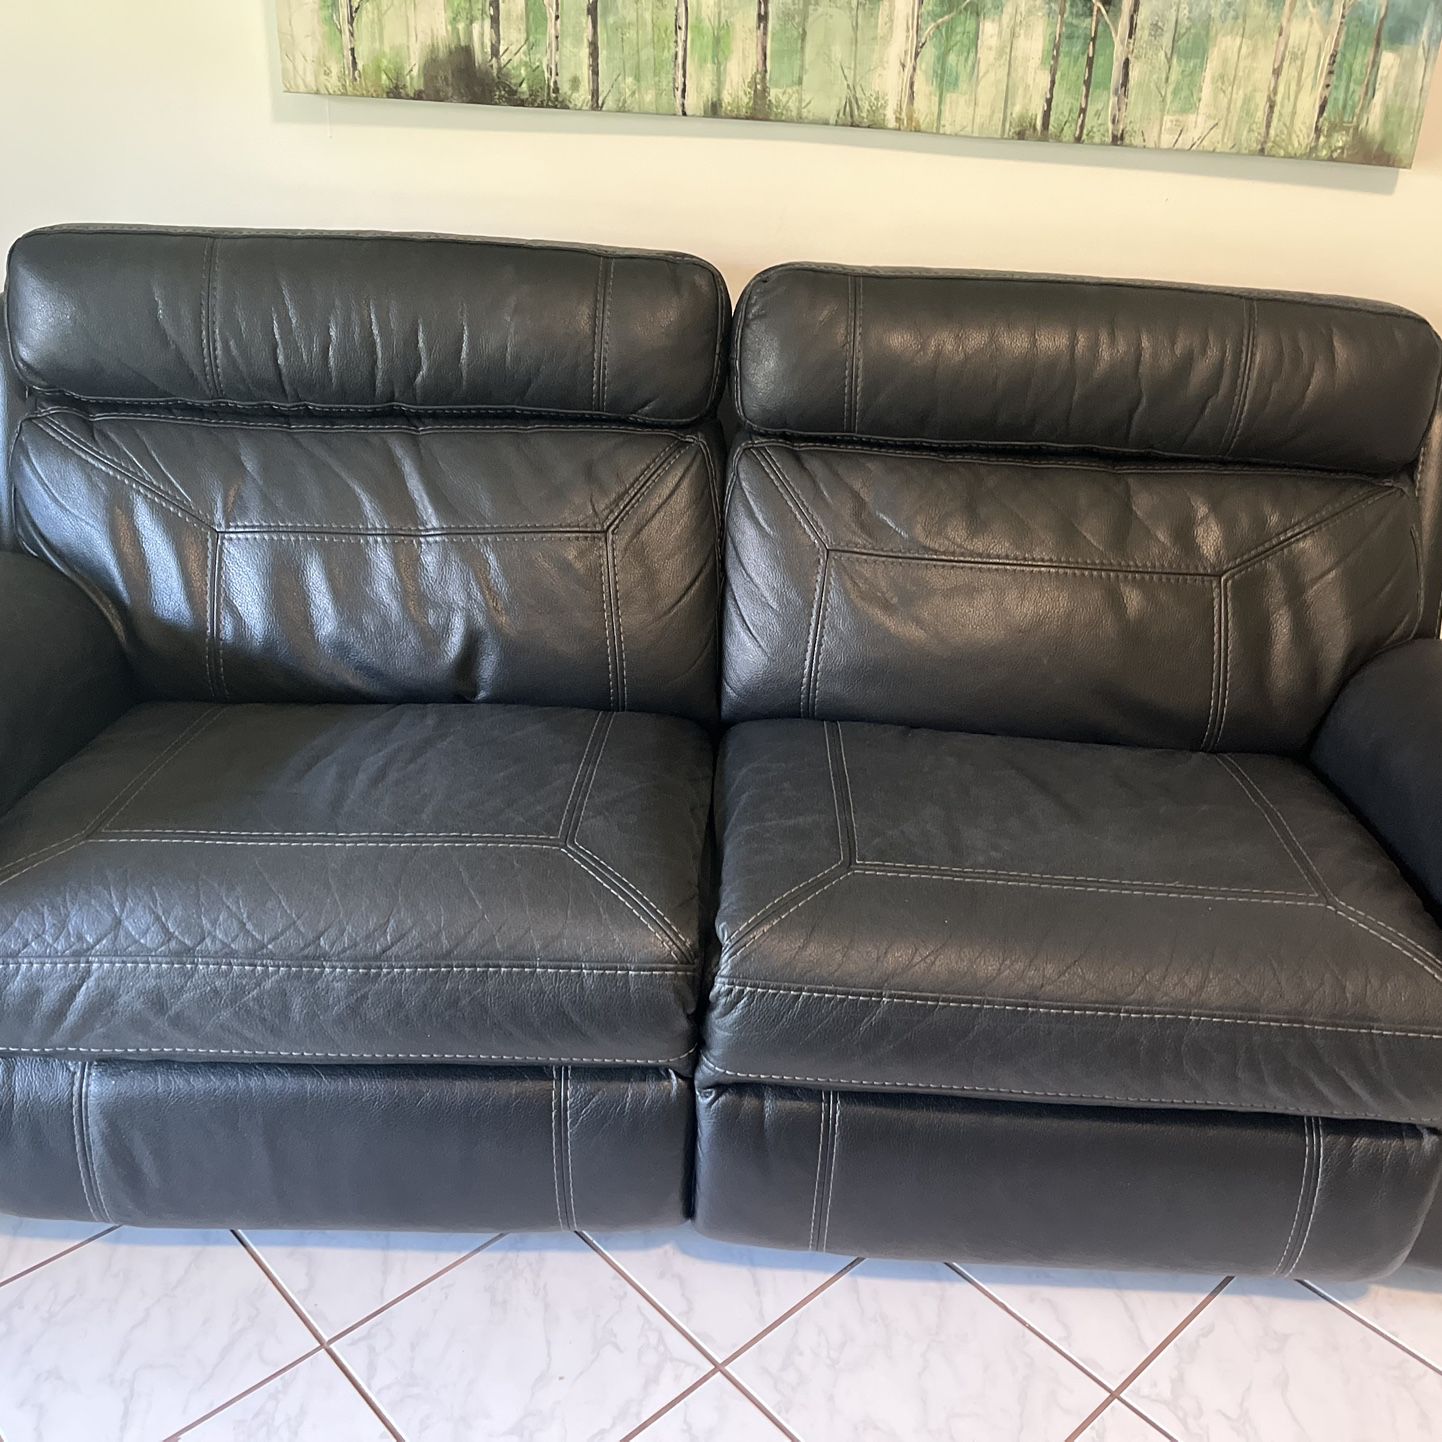 Recliner love couch